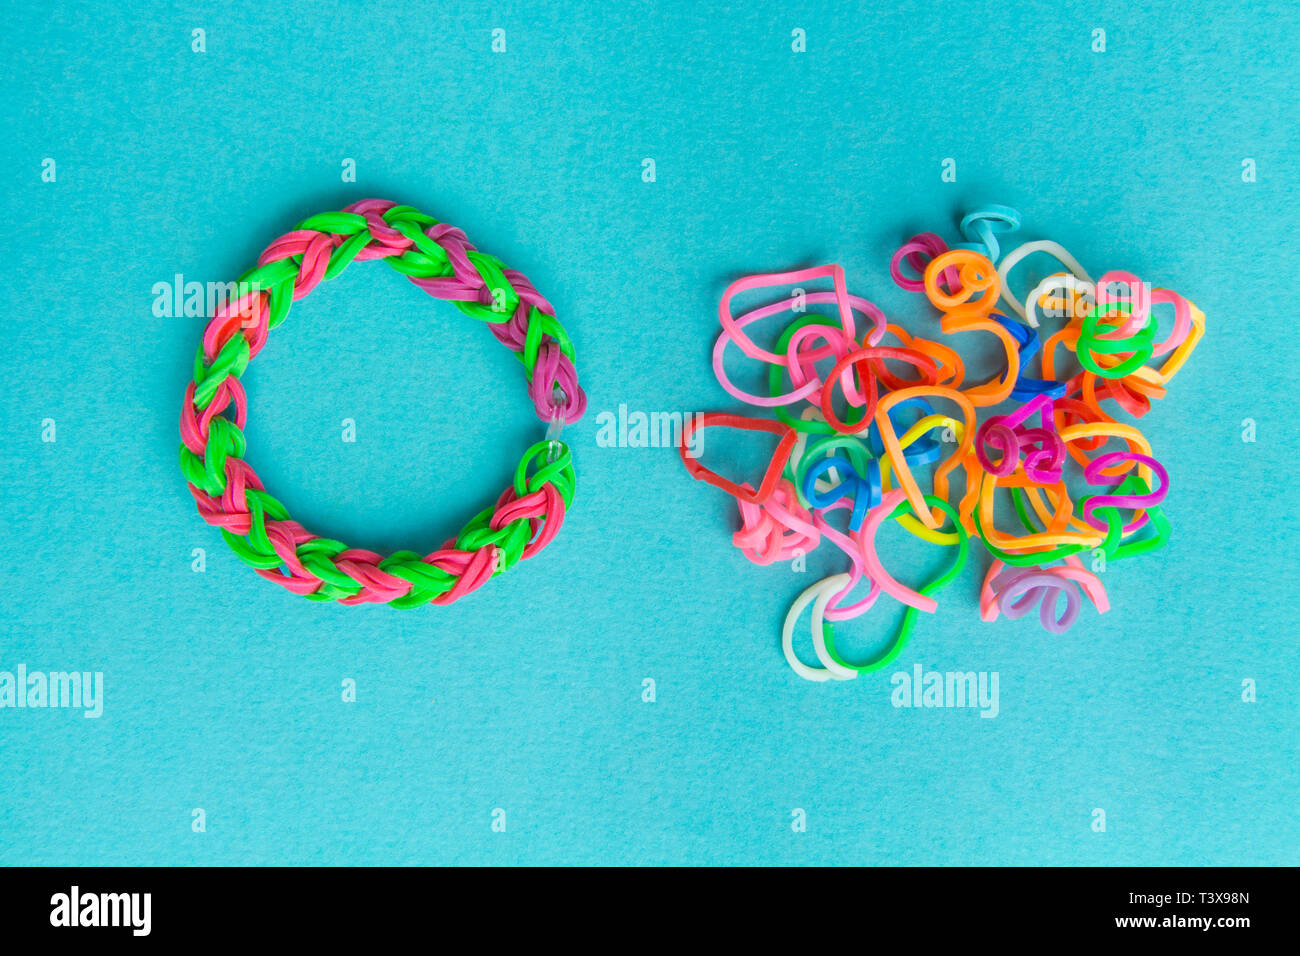 Chaos and order. Rubber bands for weaving loose and bracelet of rubber bands Stock Photo